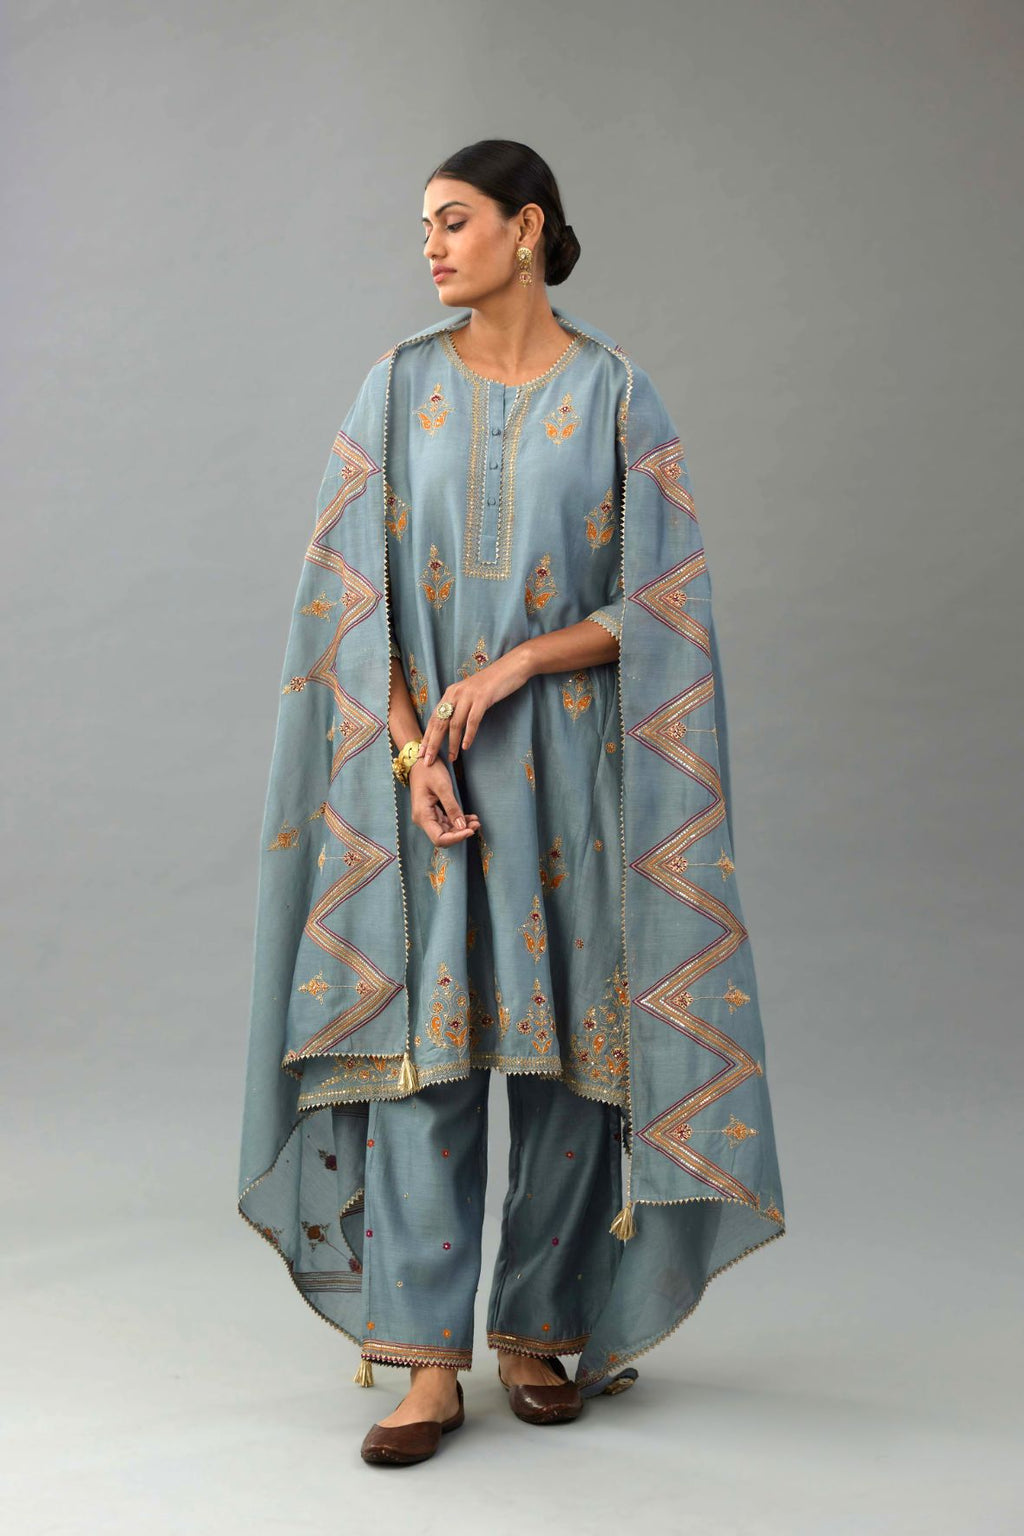 Light blue Silk chanderi dupatta in chevron pattern embroidery with contrast silk thread and dori at the sides.